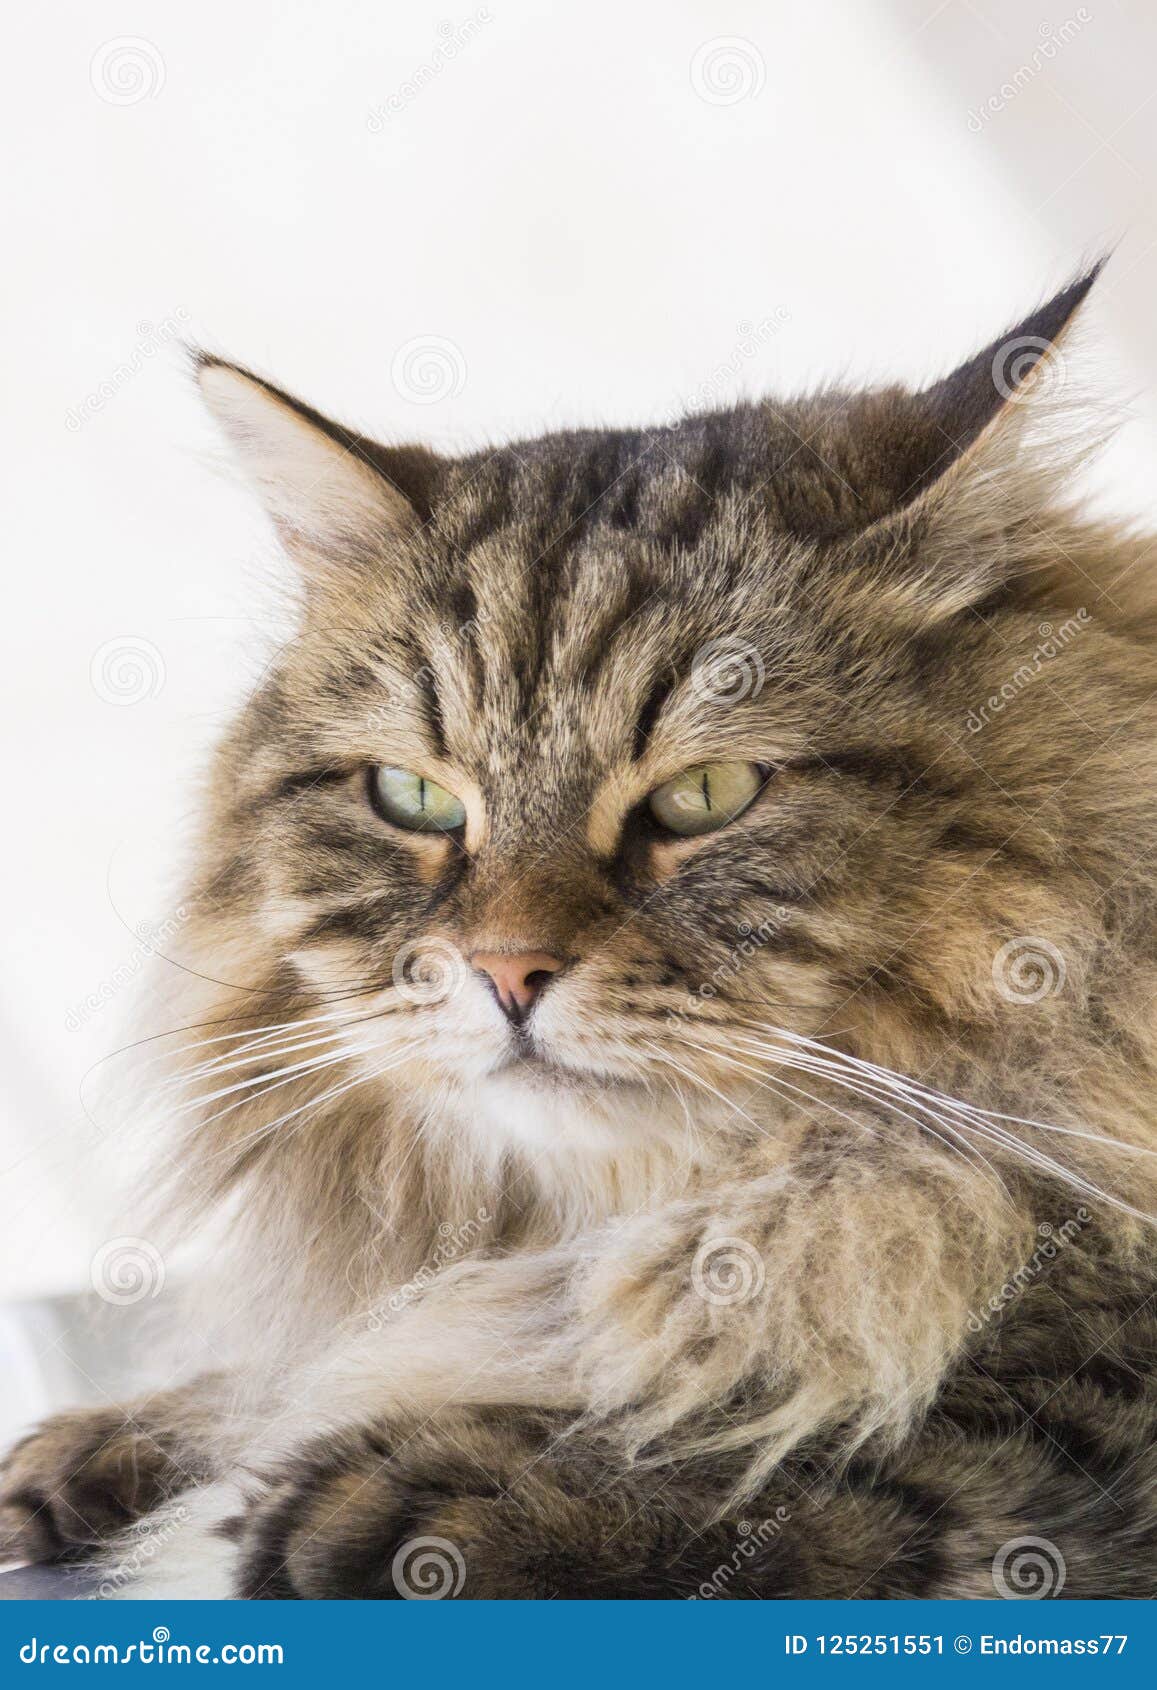 Grey Long Haired Cat Images Download 2,323 Royalty Free Photos Page 6